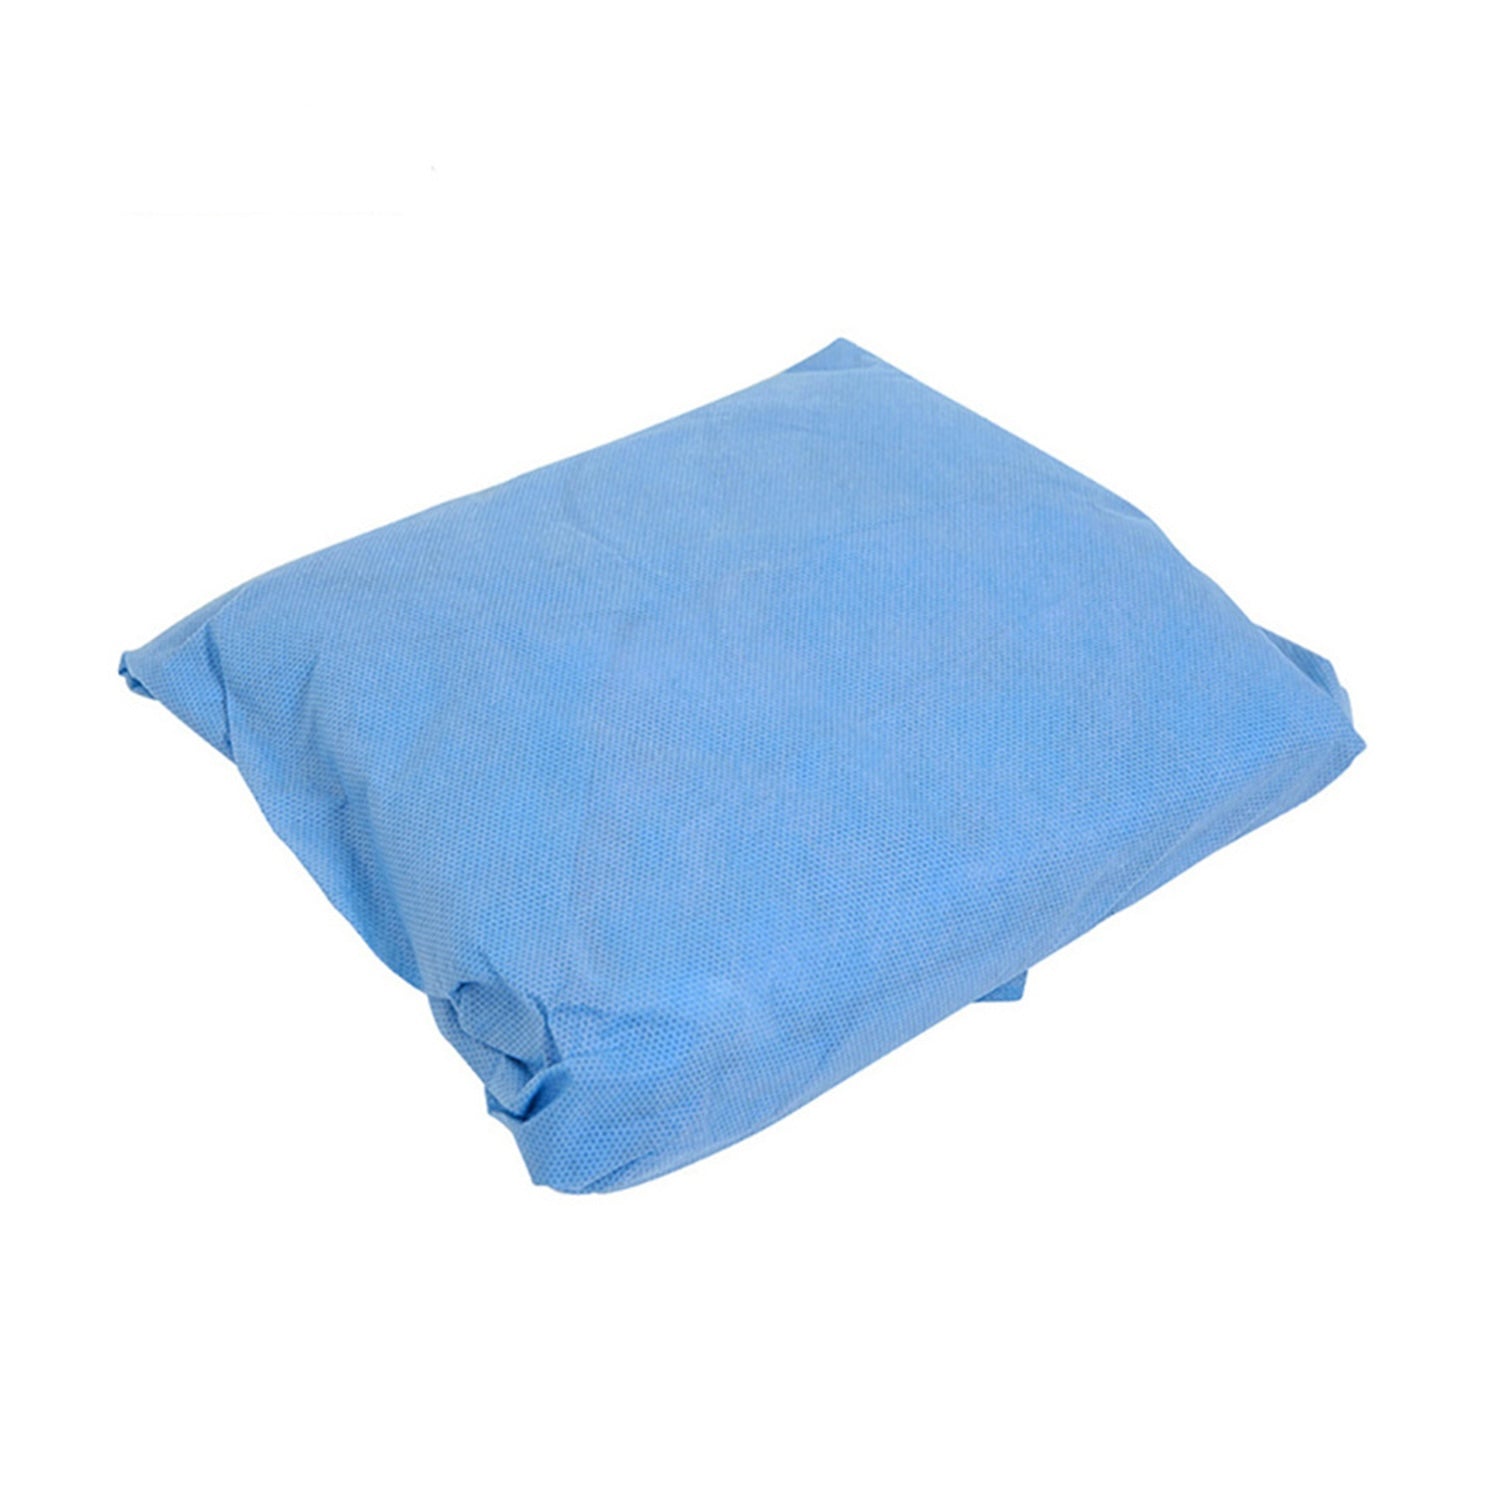 Barrier Impervious Gown | Blue | Pack of 50 (4)